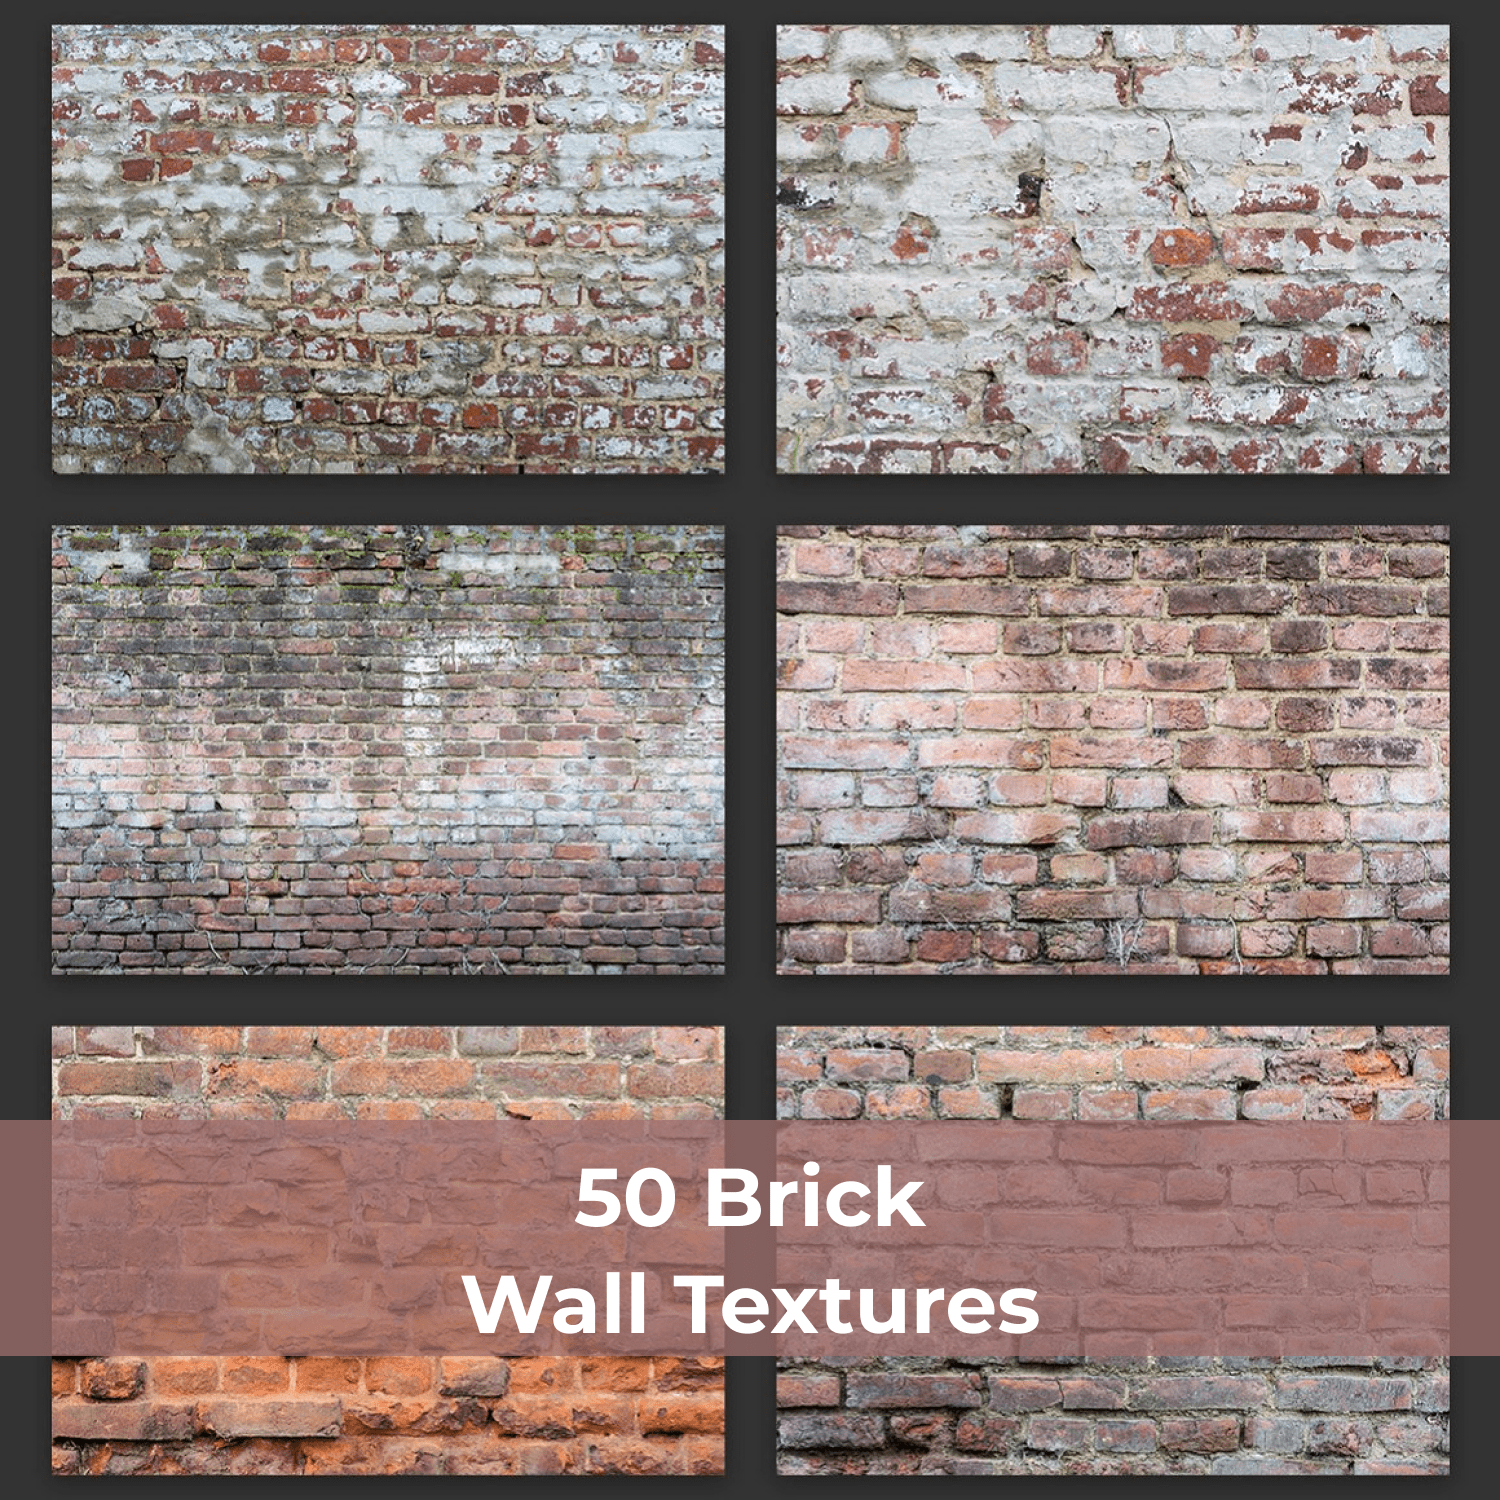 50 Brick Wall Textures cover.